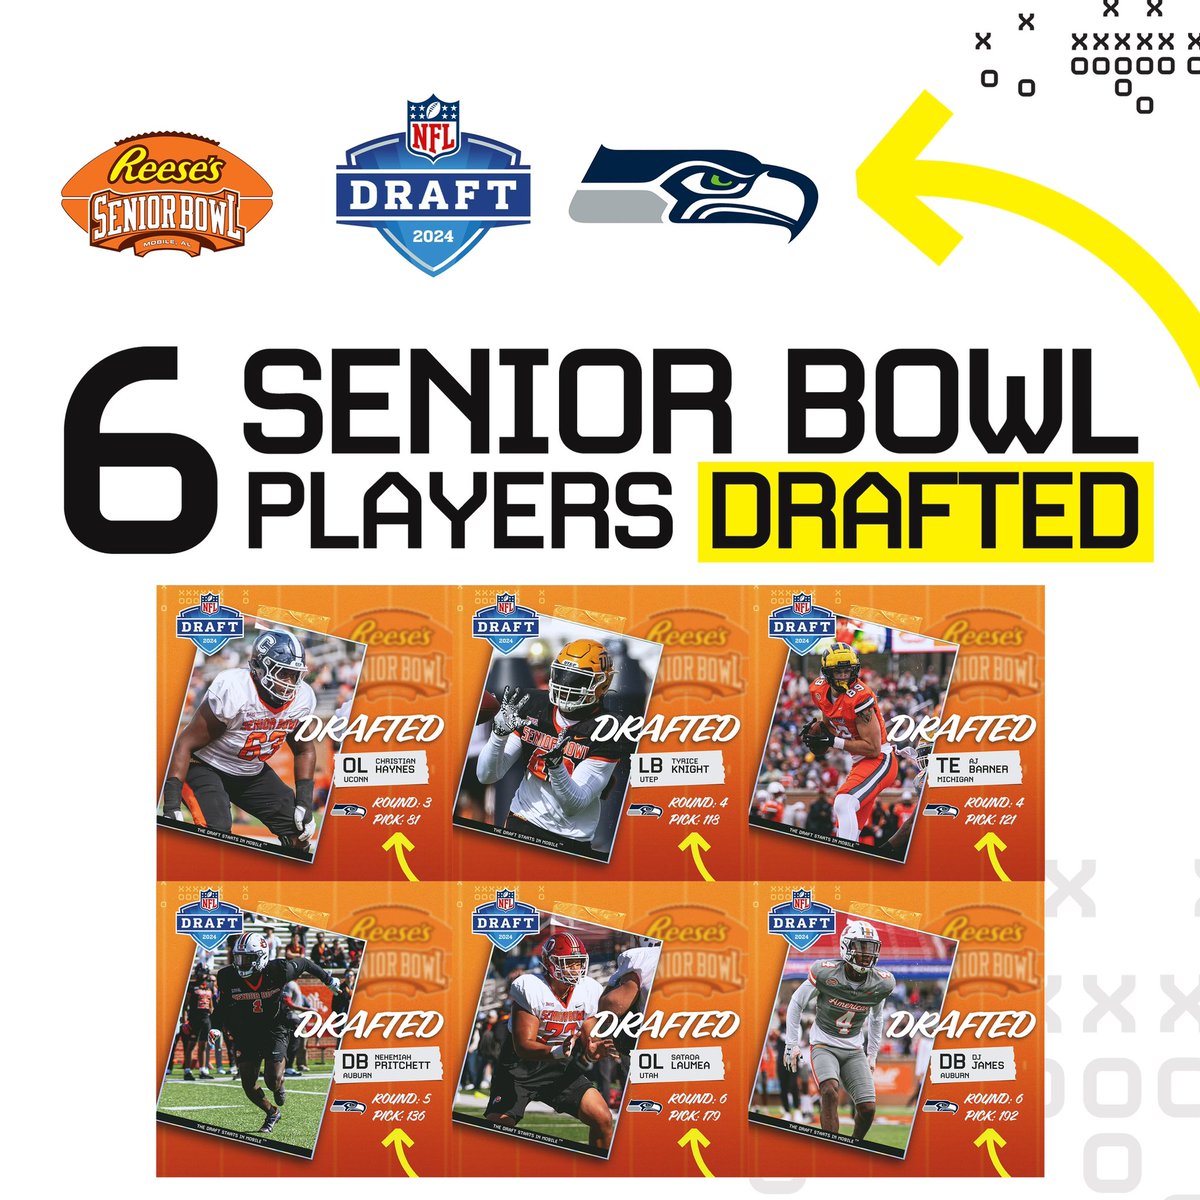 Here's what #Seahawks fans can expect from @seniorbowl draft picks: 🔹 G/C Christian Haynes (Round 3, Pick 81)- One of top-two IOL zone scheme fits in 2024 class (w/ Duke's G. Barton) should plug in as immediate solid starter at RG. Durable, reliable, & NFL-ready with 49…